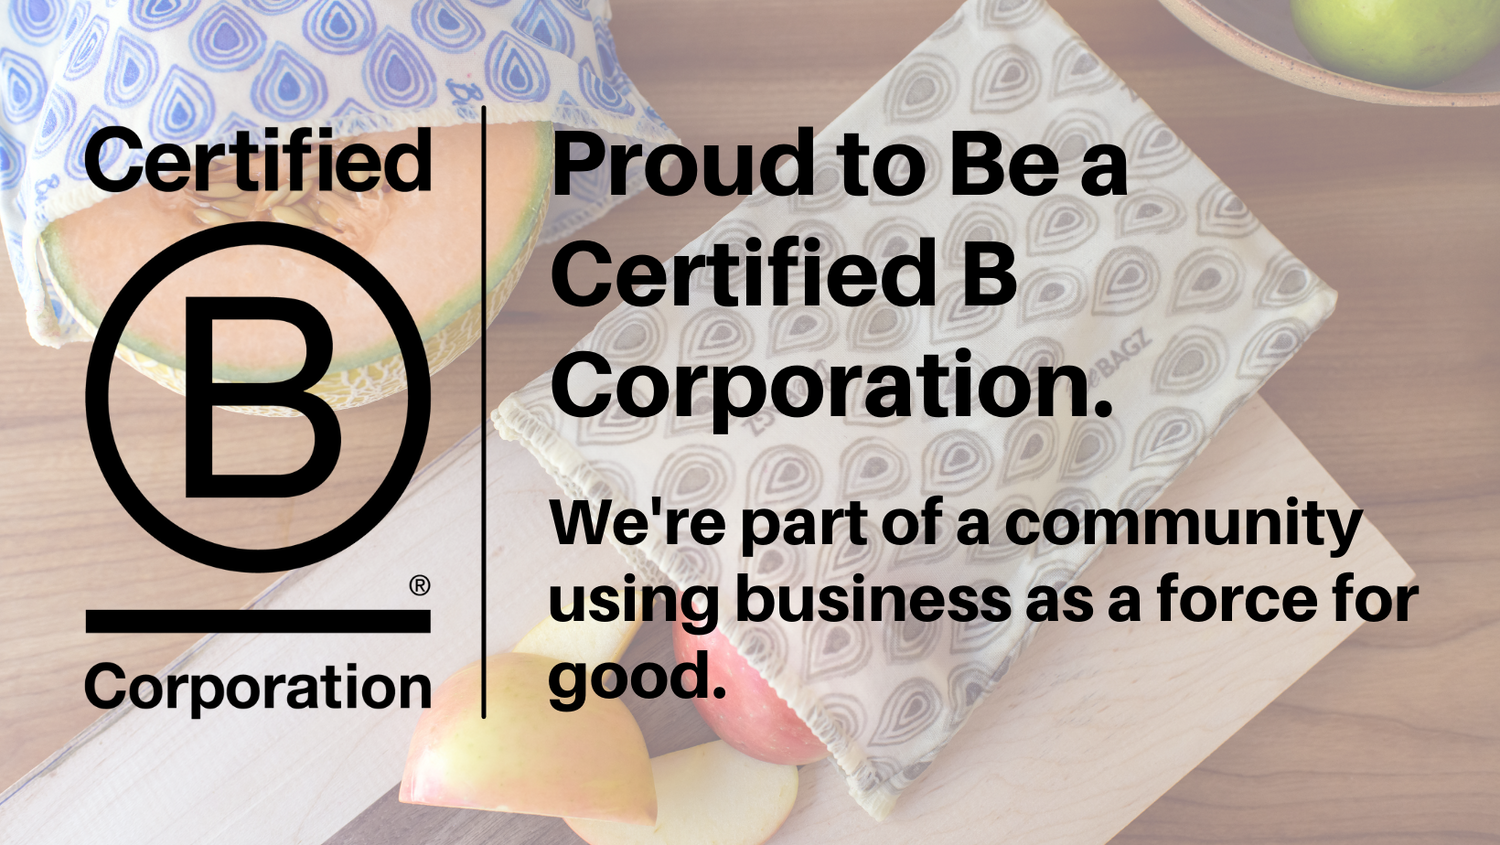 Proud to Be a Certified B Corporation: At BeeBAGZ, we promote sustainability and social responsibility in our drive to create a better, global community.